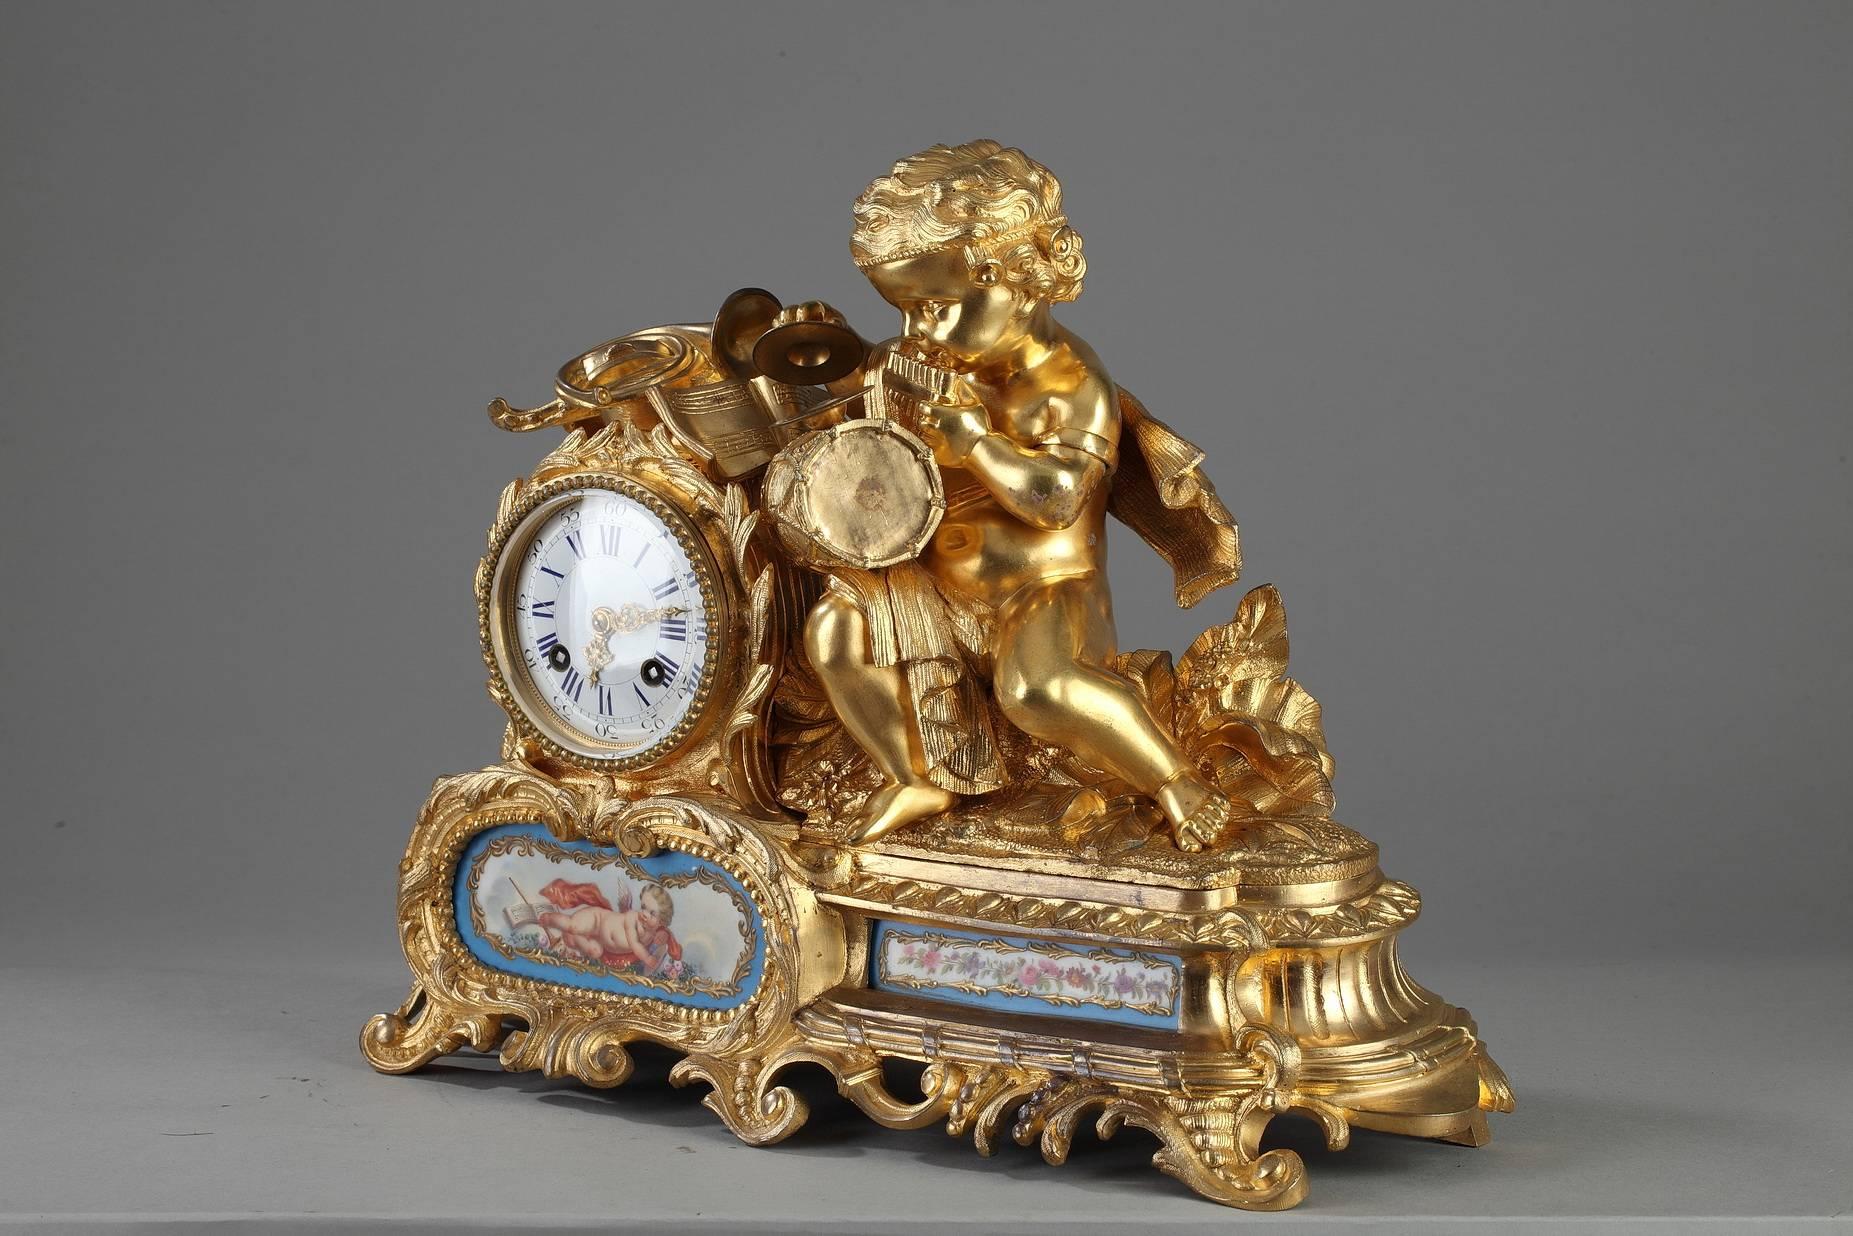 Gilt and sculpted bronze mantel clock featuring a young cupid seated on a rock playing various musical instruments. He is set on a lively base embellished with scrollwork and foliage. The main face of the base is decorated with two